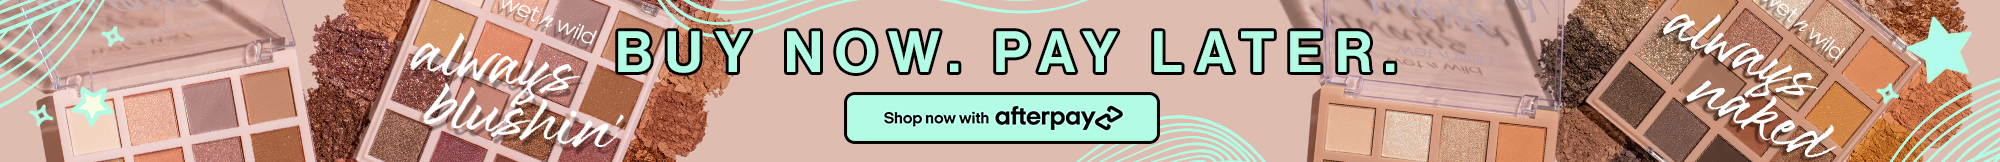 Buy Now and Pay Later with Afterpay. Shop now with afterpay.